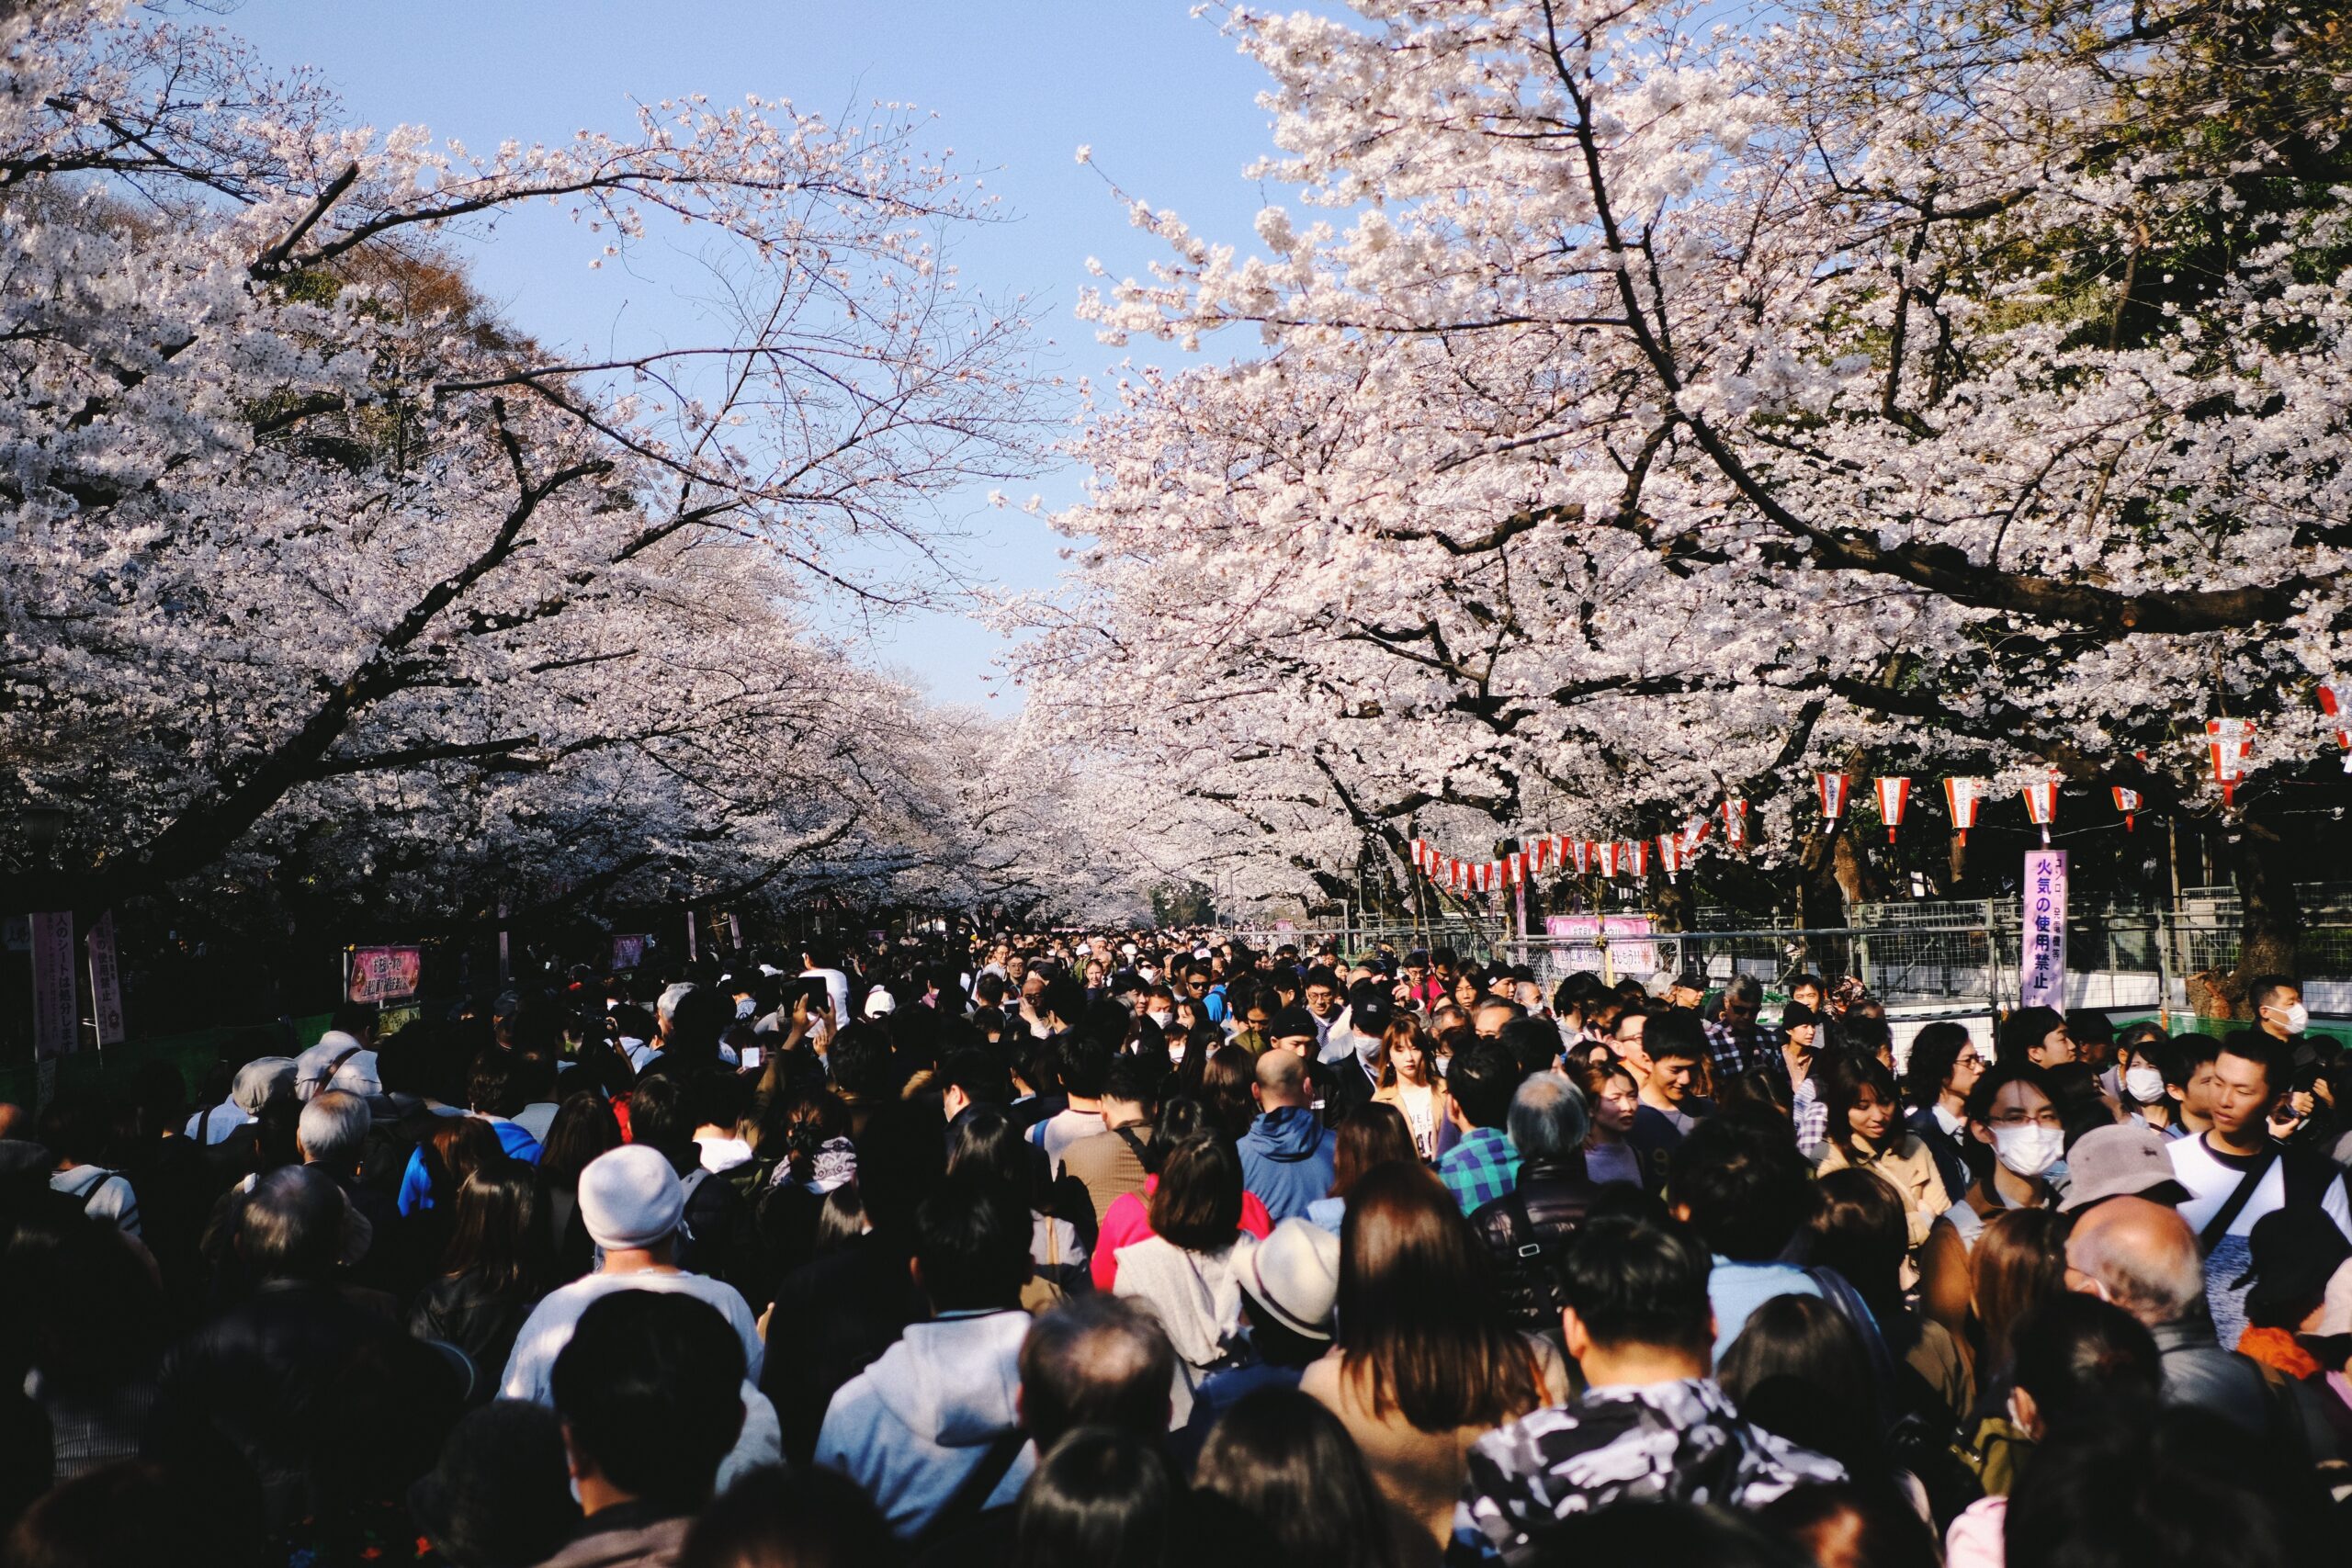 The cherry blossom festival of Tokyo is among the most popular. Learn about the annual festivities. 
pictured: The Nakameguro Canal and the walkway which hosts large crowds every year for hanami. 